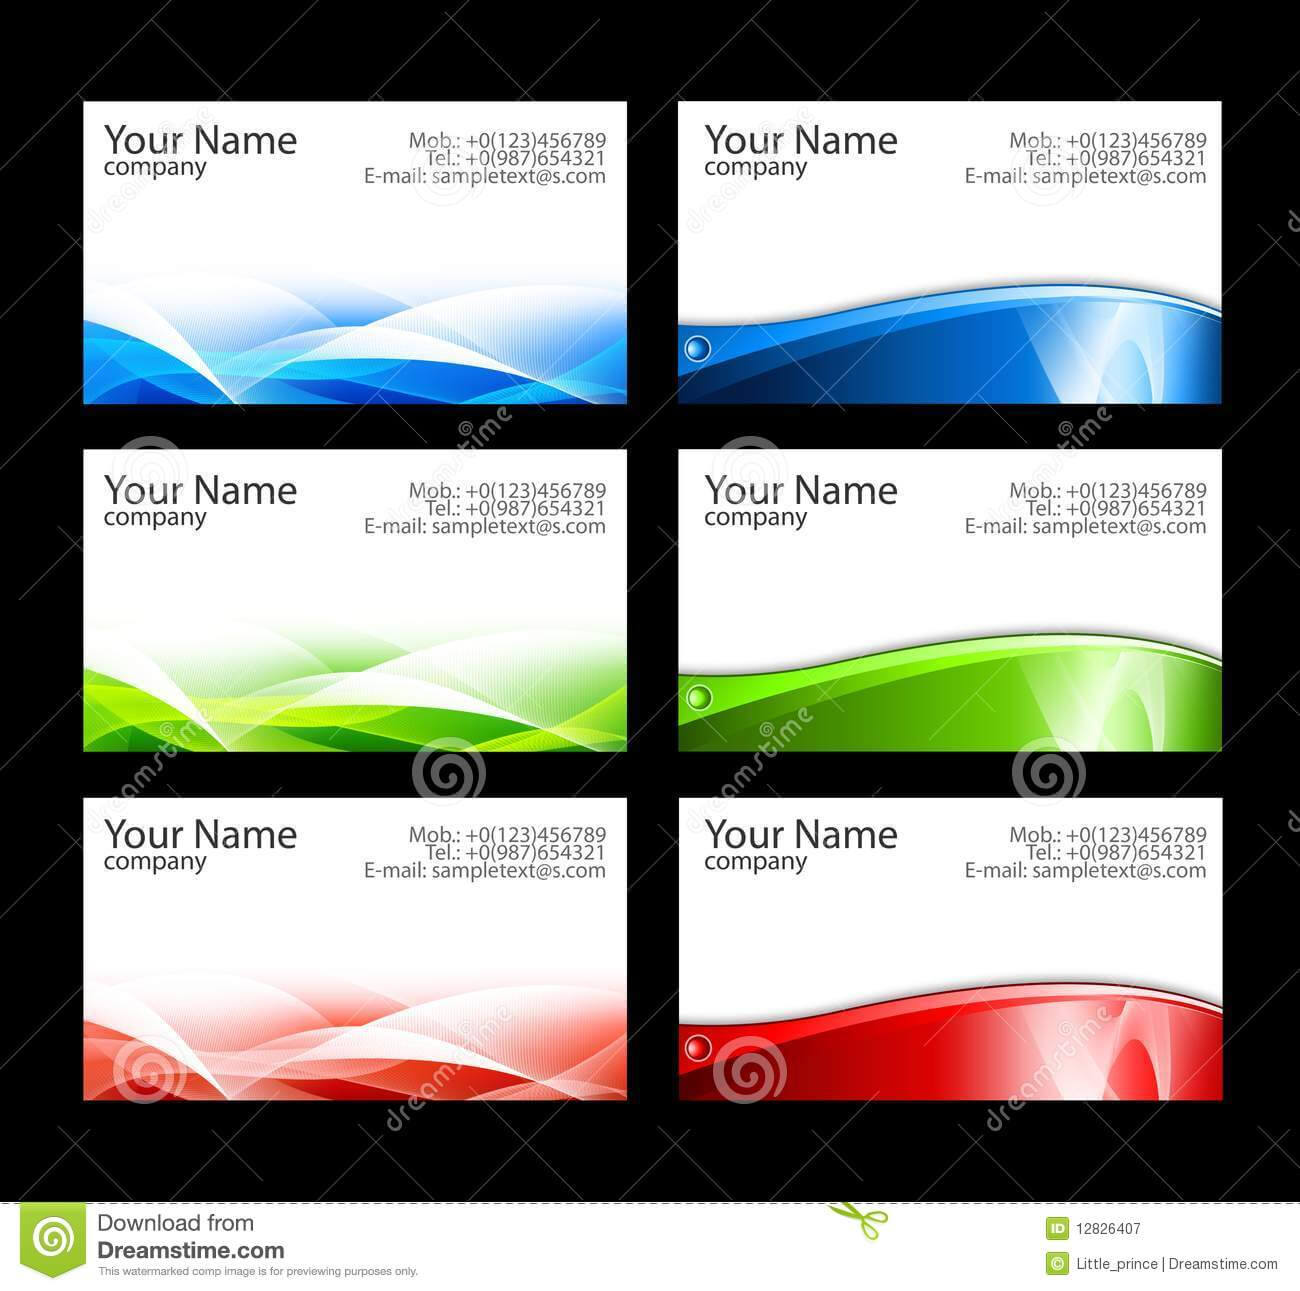 17 Business Cards Templates Free Downloads Images – Free Pertaining To Templates For Visiting Cards Free Downloads